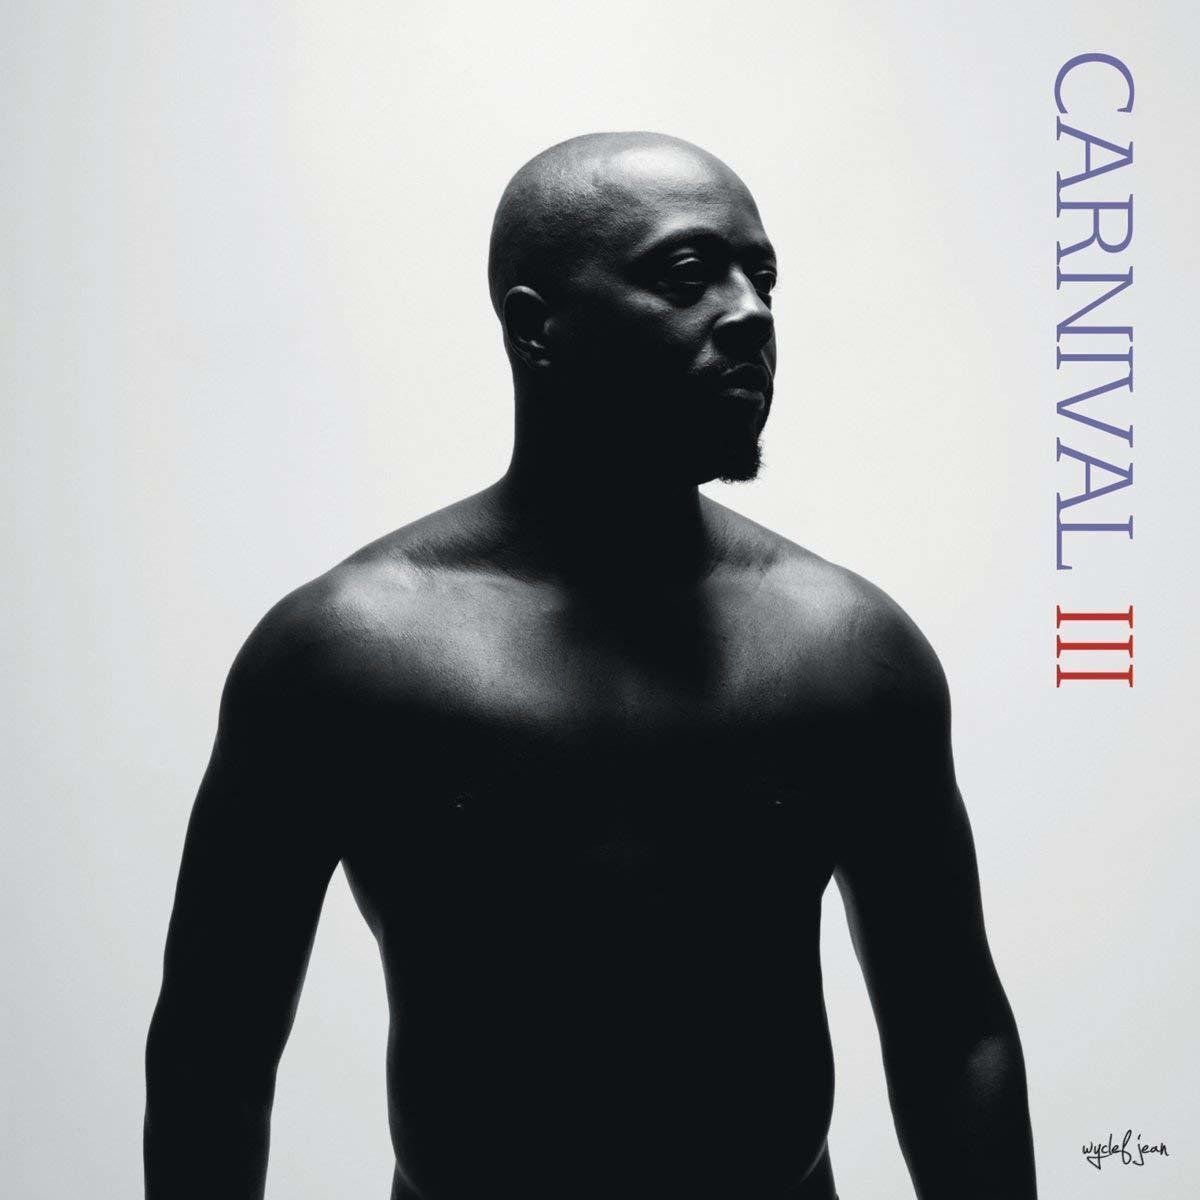 Disco de vinil Wyclef Jean Carnival III: The Fall and Rise of a Refugee (LP)